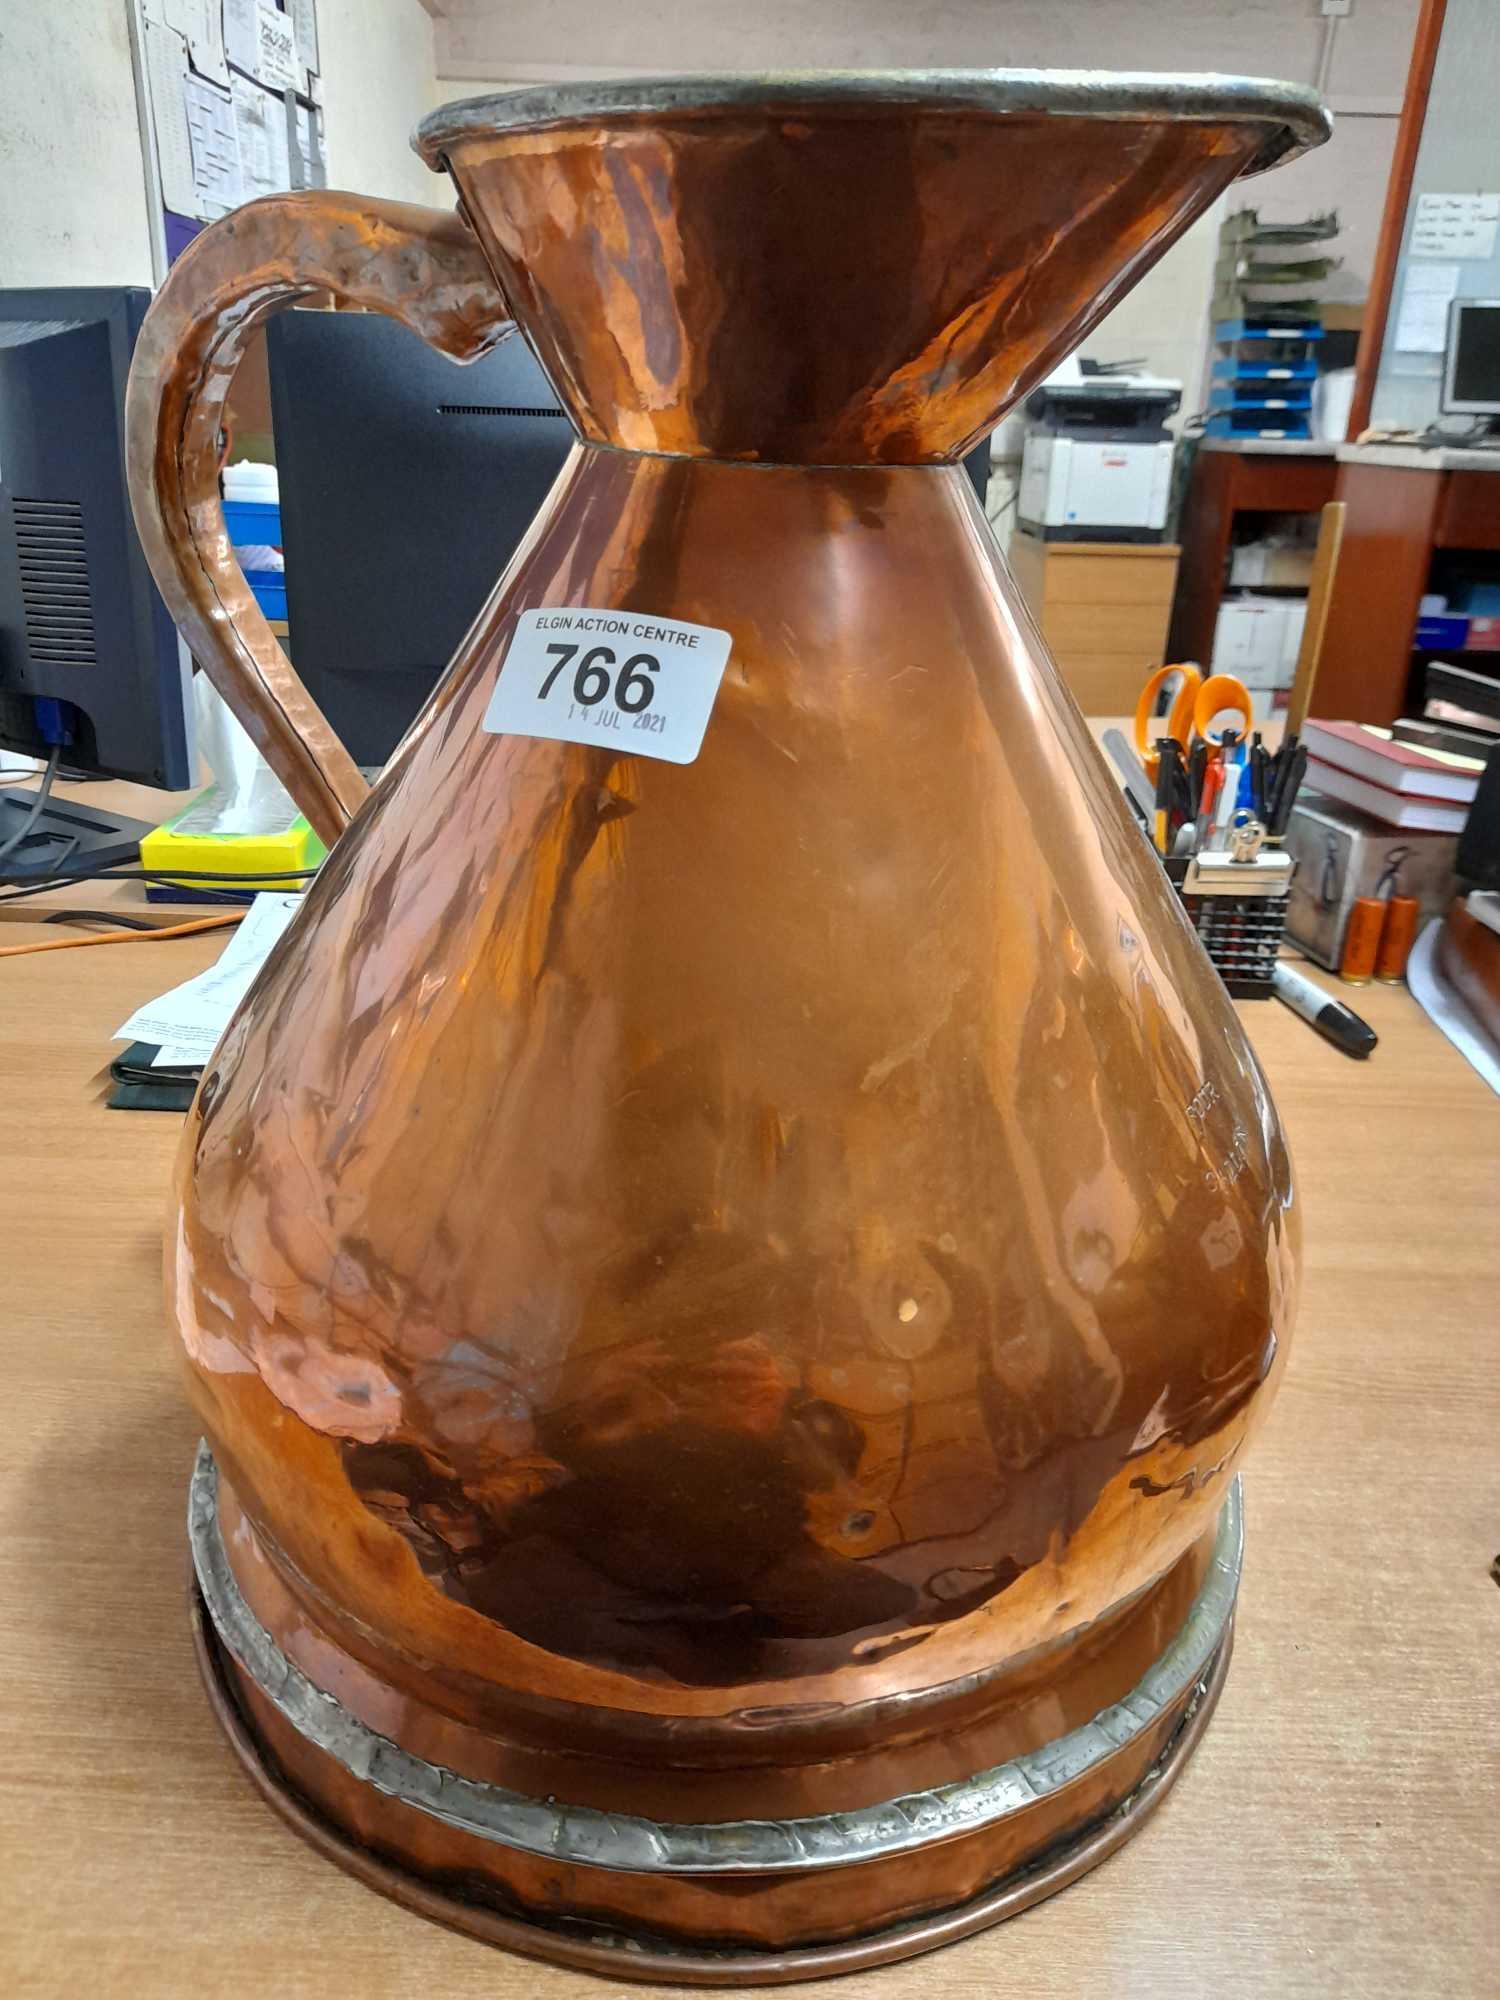 4 GALLON COPPER WHISKY MEASURING JUG - Image 3 of 24